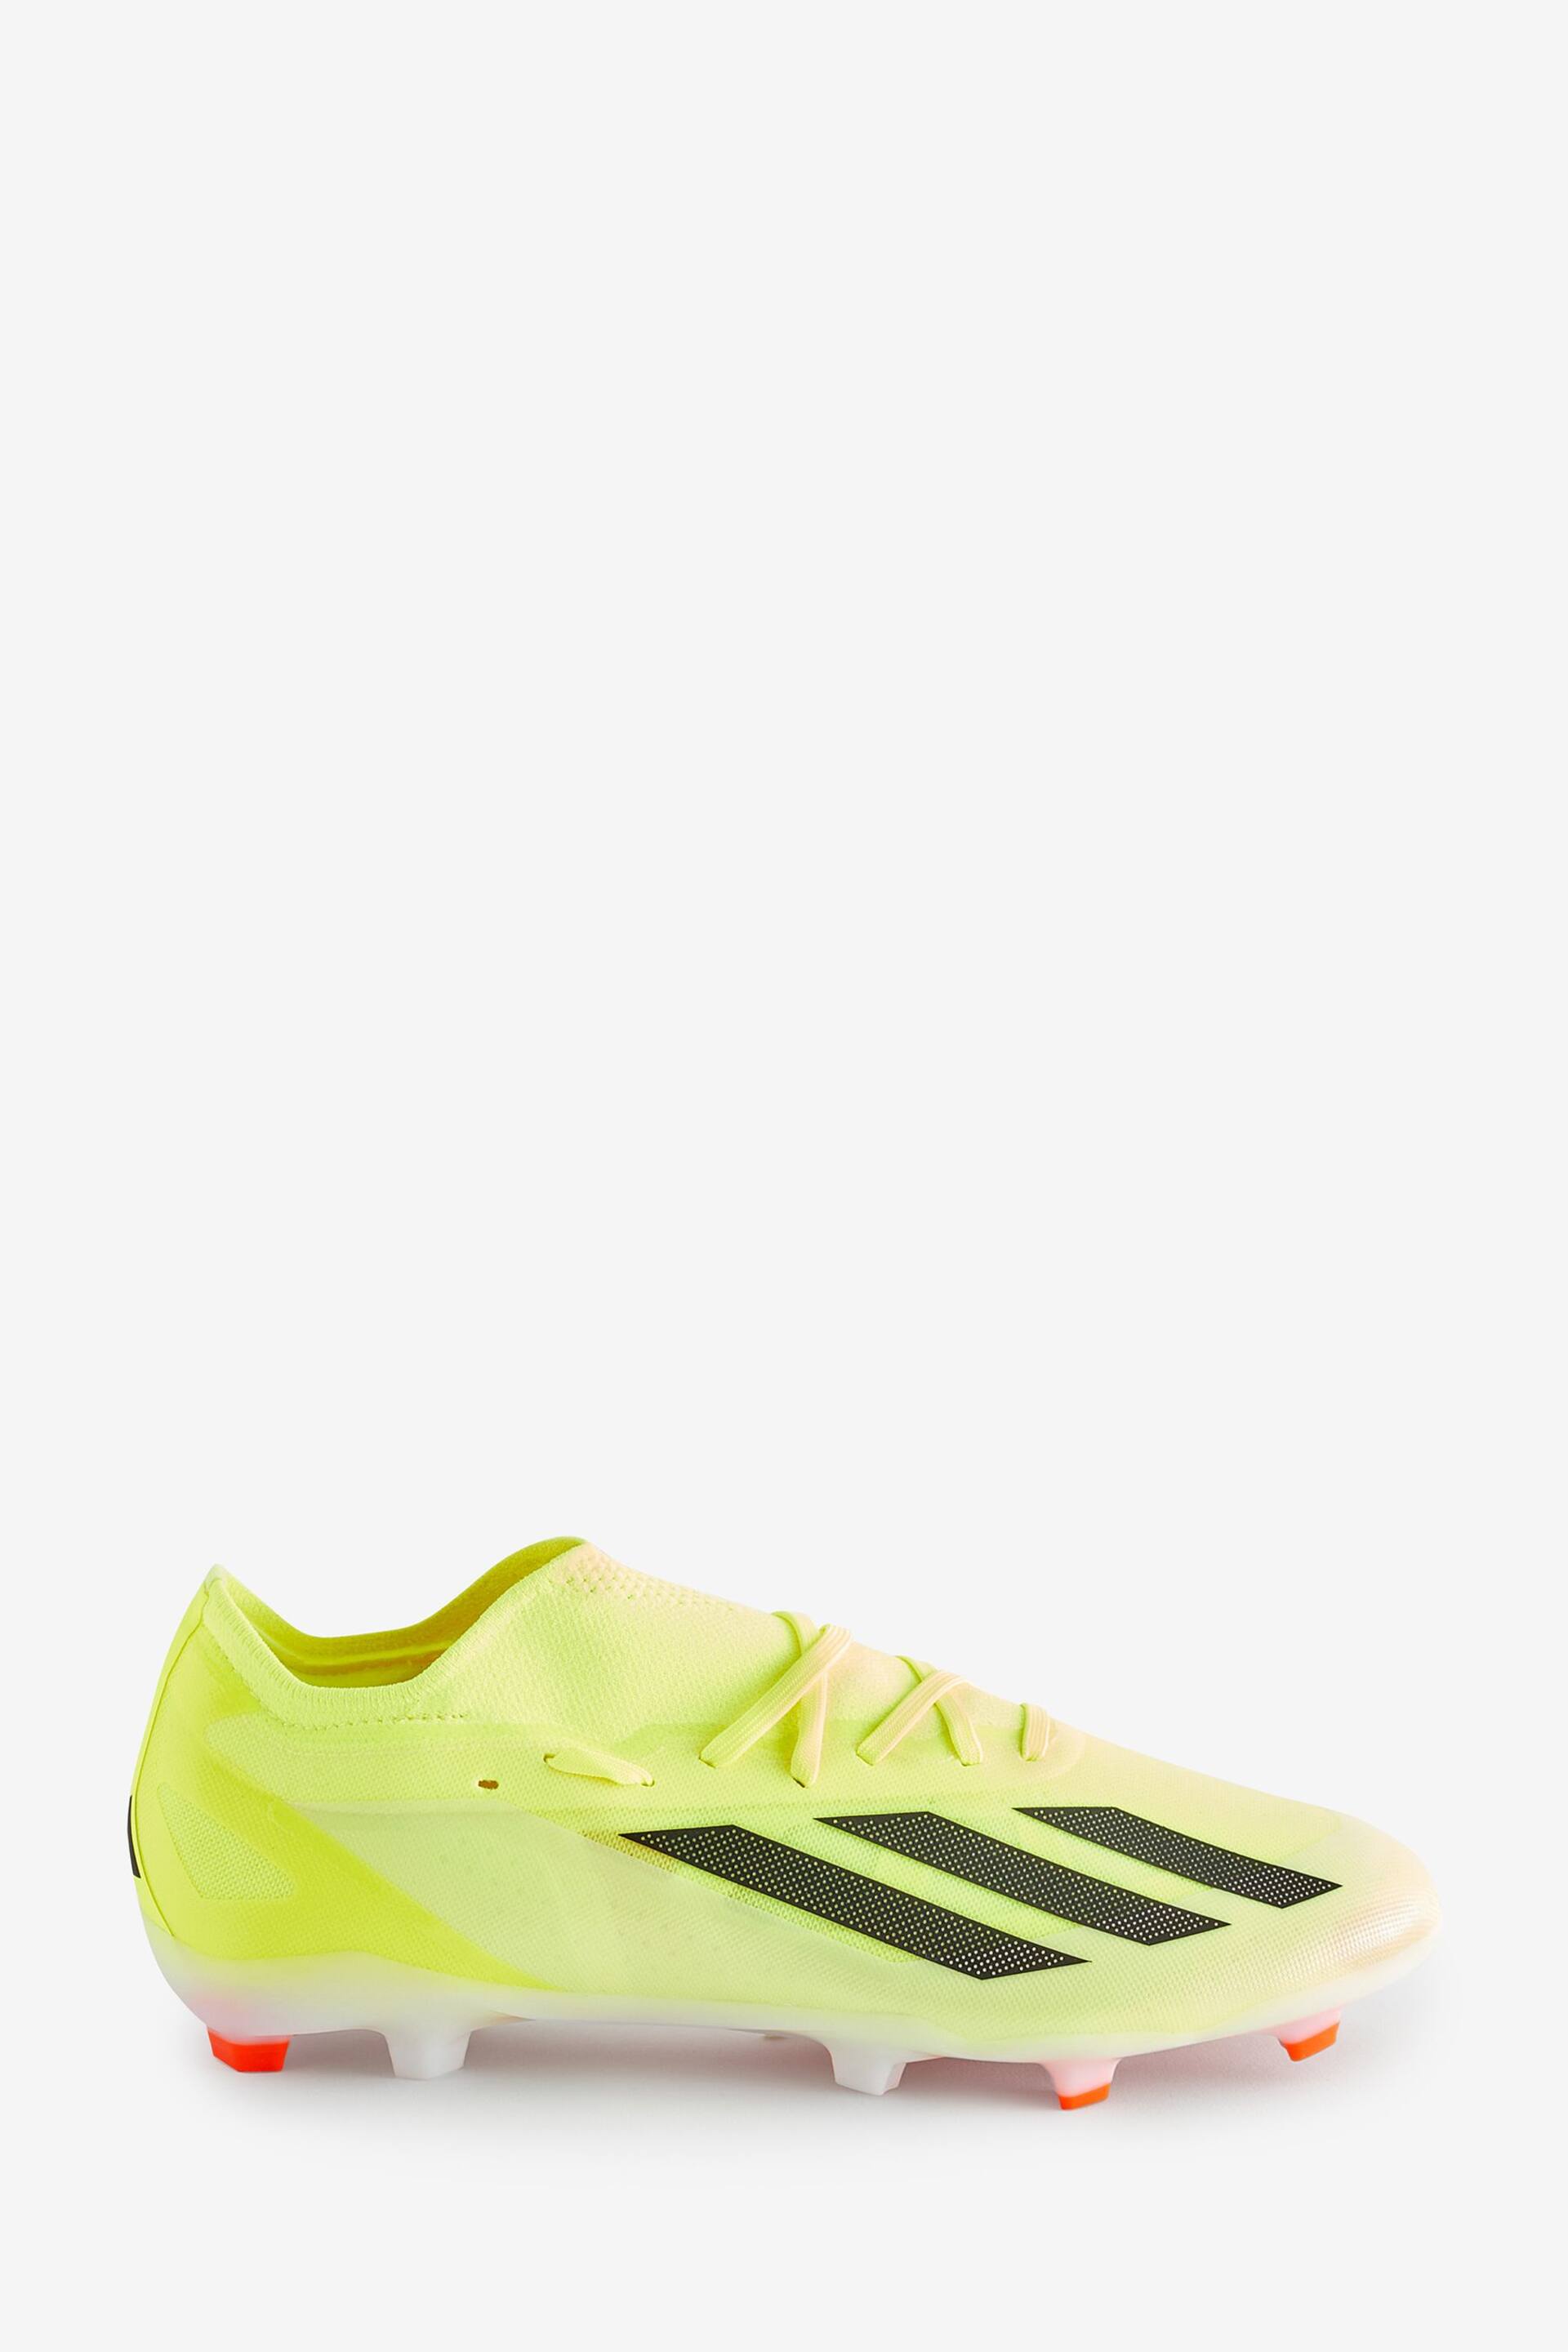 adidas Yellow Performance X Crazyfast Pro Firm Ground Boots - Image 1 of 5